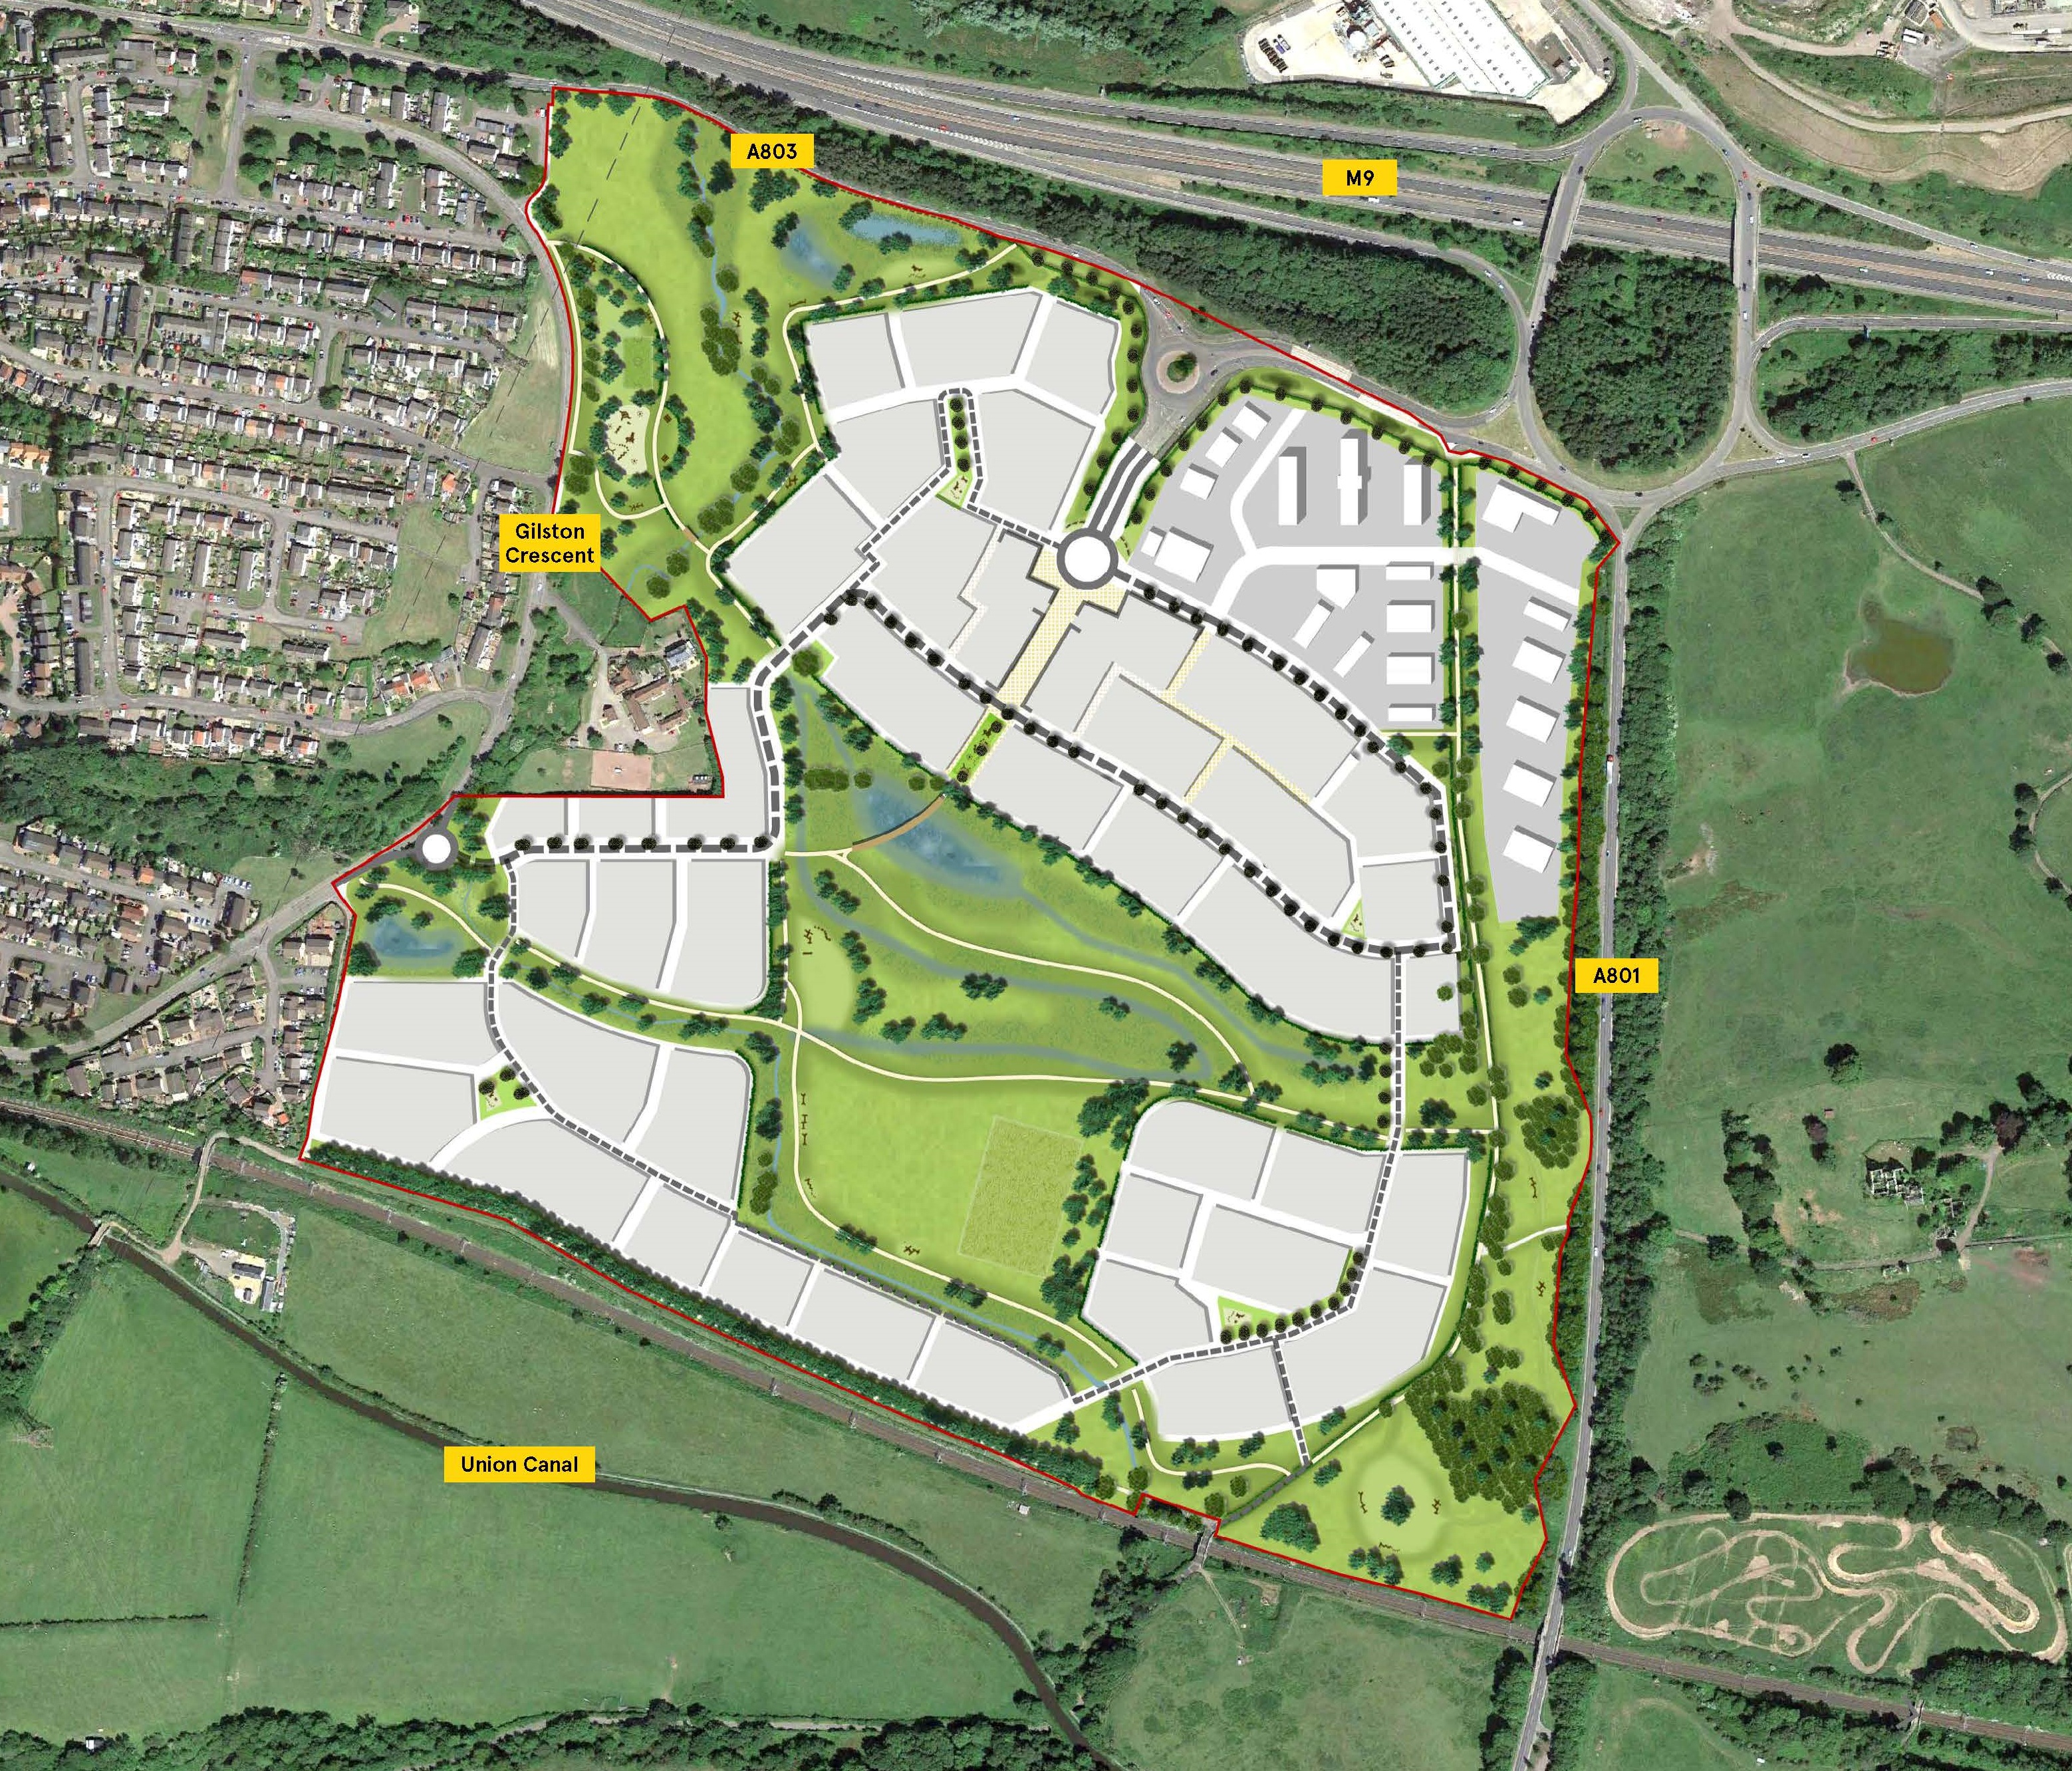 Plans submitted for new mixed-use development at Gilston Park